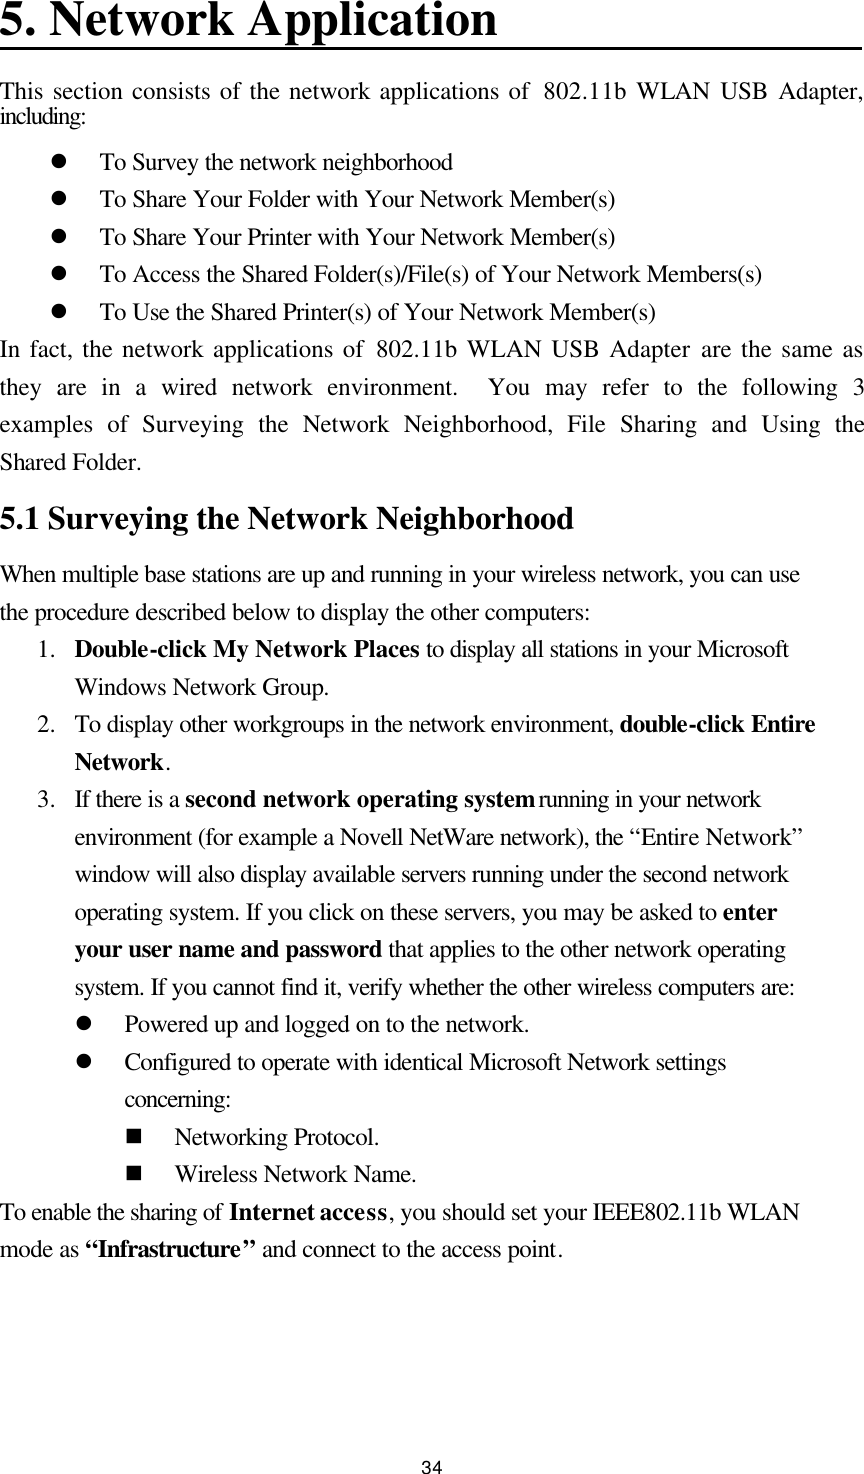  34 5. Network Application This section consists of the network applications of  802.11b WLAN USB Adapter, including: l To Survey the network neighborhood l To Share Your Folder with Your Network Member(s) l To Share Your Printer with Your Network Member(s) l To Access the Shared Folder(s)/File(s) of Your Network Members(s) l To Use the Shared Printer(s) of Your Network Member(s) In fact, the network applications of 802.11b WLAN USB Adapter are the same as they are in a wired network environment.  You may refer to the following 3 examples of Surveying the Network Neighborhood, File Sharing and Using the Shared Folder. 5.1 Surveying the Network Neighborhood When multiple base stations are up and running in your wireless network, you can use the procedure described below to display the other computers: 1.  Double-click My Network Places to display all stations in your Microsoft Windows Network Group. 2.  To display other workgroups in the network environment, double-click Entire Network. 3.  If there is a second network operating system running in your network environment (for example a Novell NetWare network), the “Entire Network” window will also display available servers running under the second network operating system. If you click on these servers, you may be asked to enter your user name and password that applies to the other network operating system. If you cannot find it, verify whether the other wireless computers are: l Powered up and logged on to the network. l Configured to operate with identical Microsoft Network settings concerning: n Networking Protocol. n Wireless Network Name. To enable the sharing of Internet access, you should set your IEEE802.11b WLAN mode as “Infrastructure” and connect to the access point.   